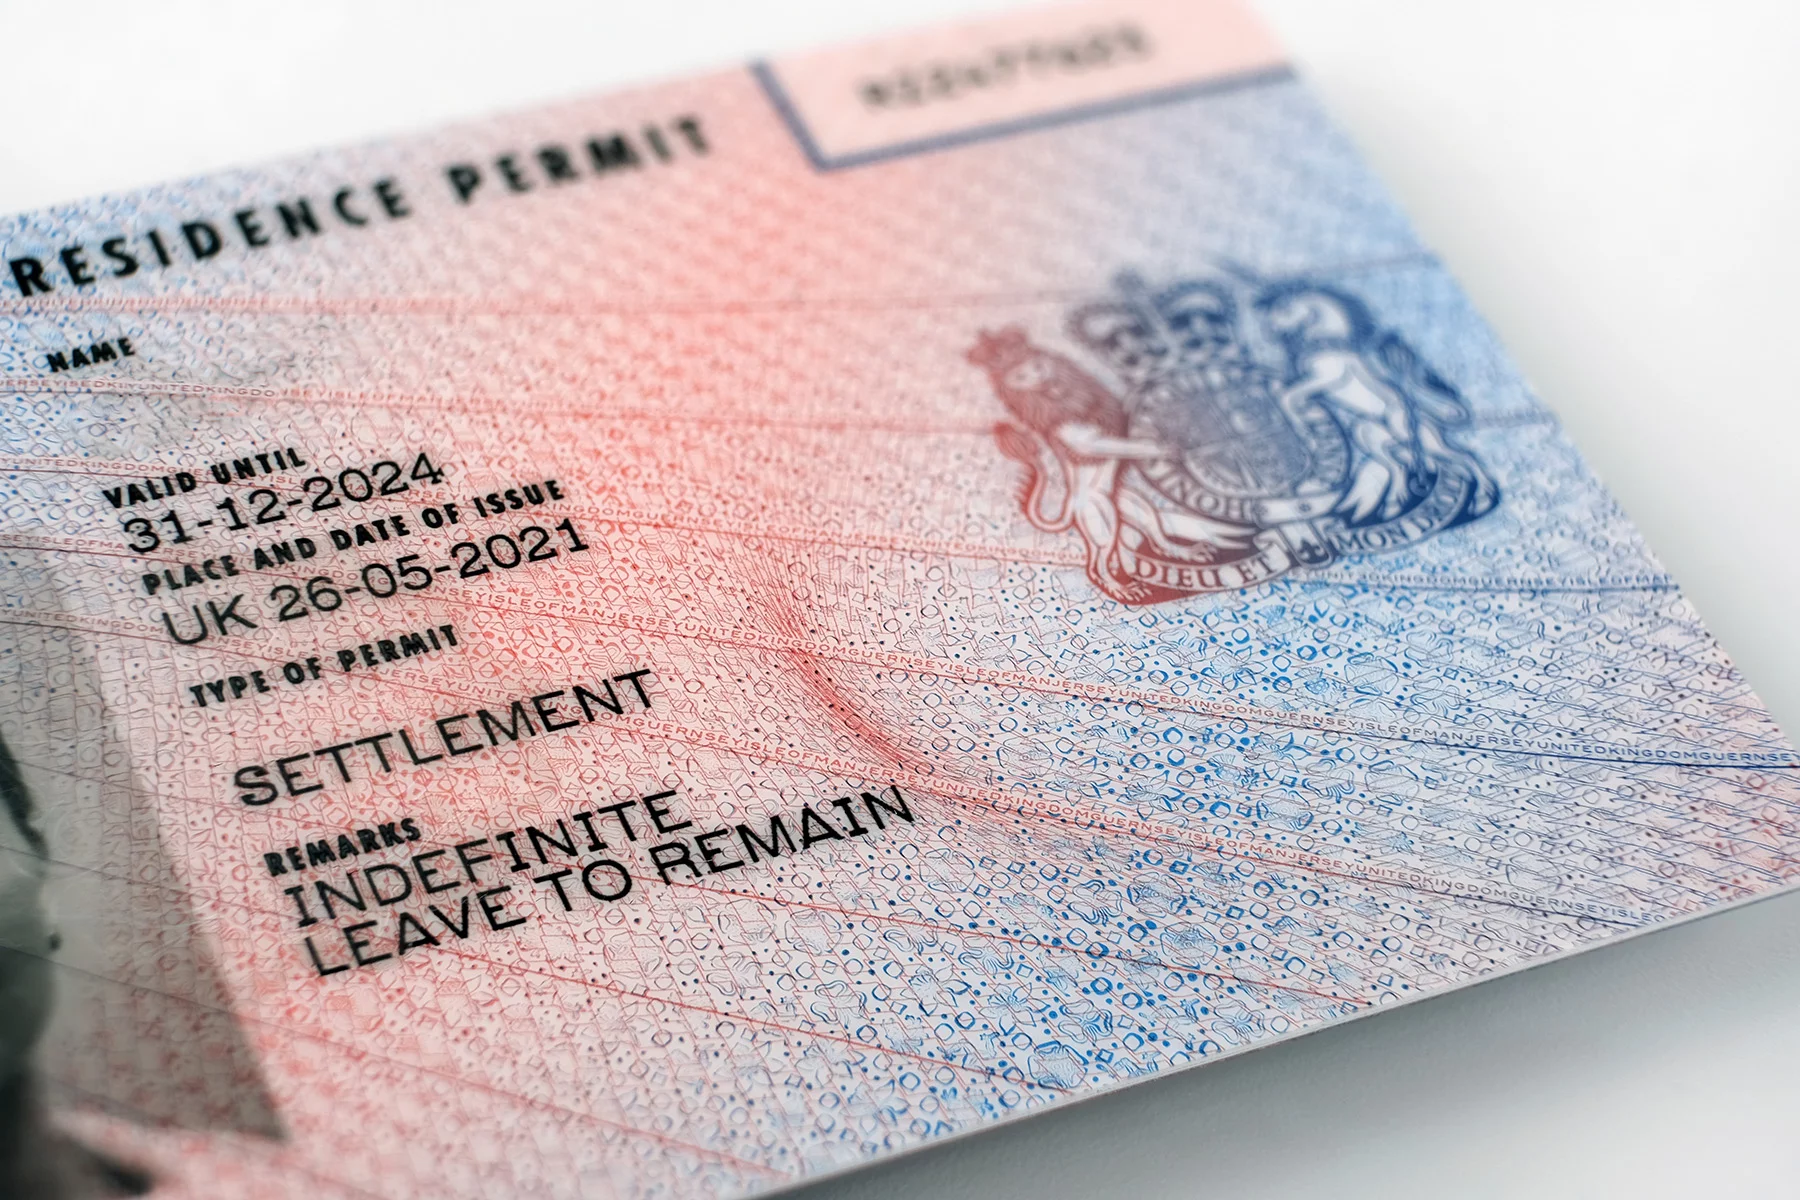 UK Residence Permit document for Indefinite Leave to Remain (ILR)